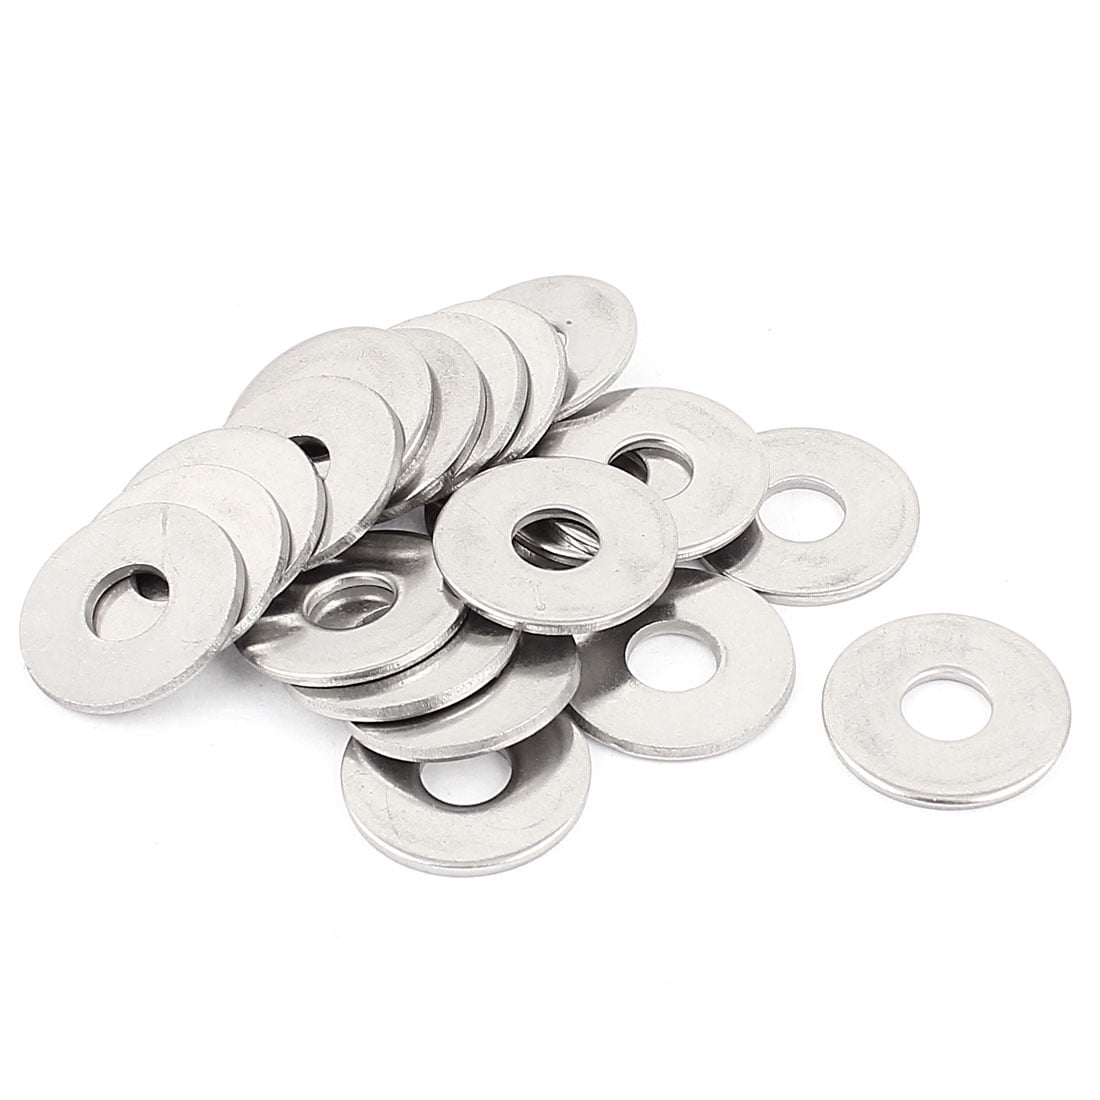 Steel Hole Adapter Ring Fastener Plain Washer Flat Washers Adapter Gasket 